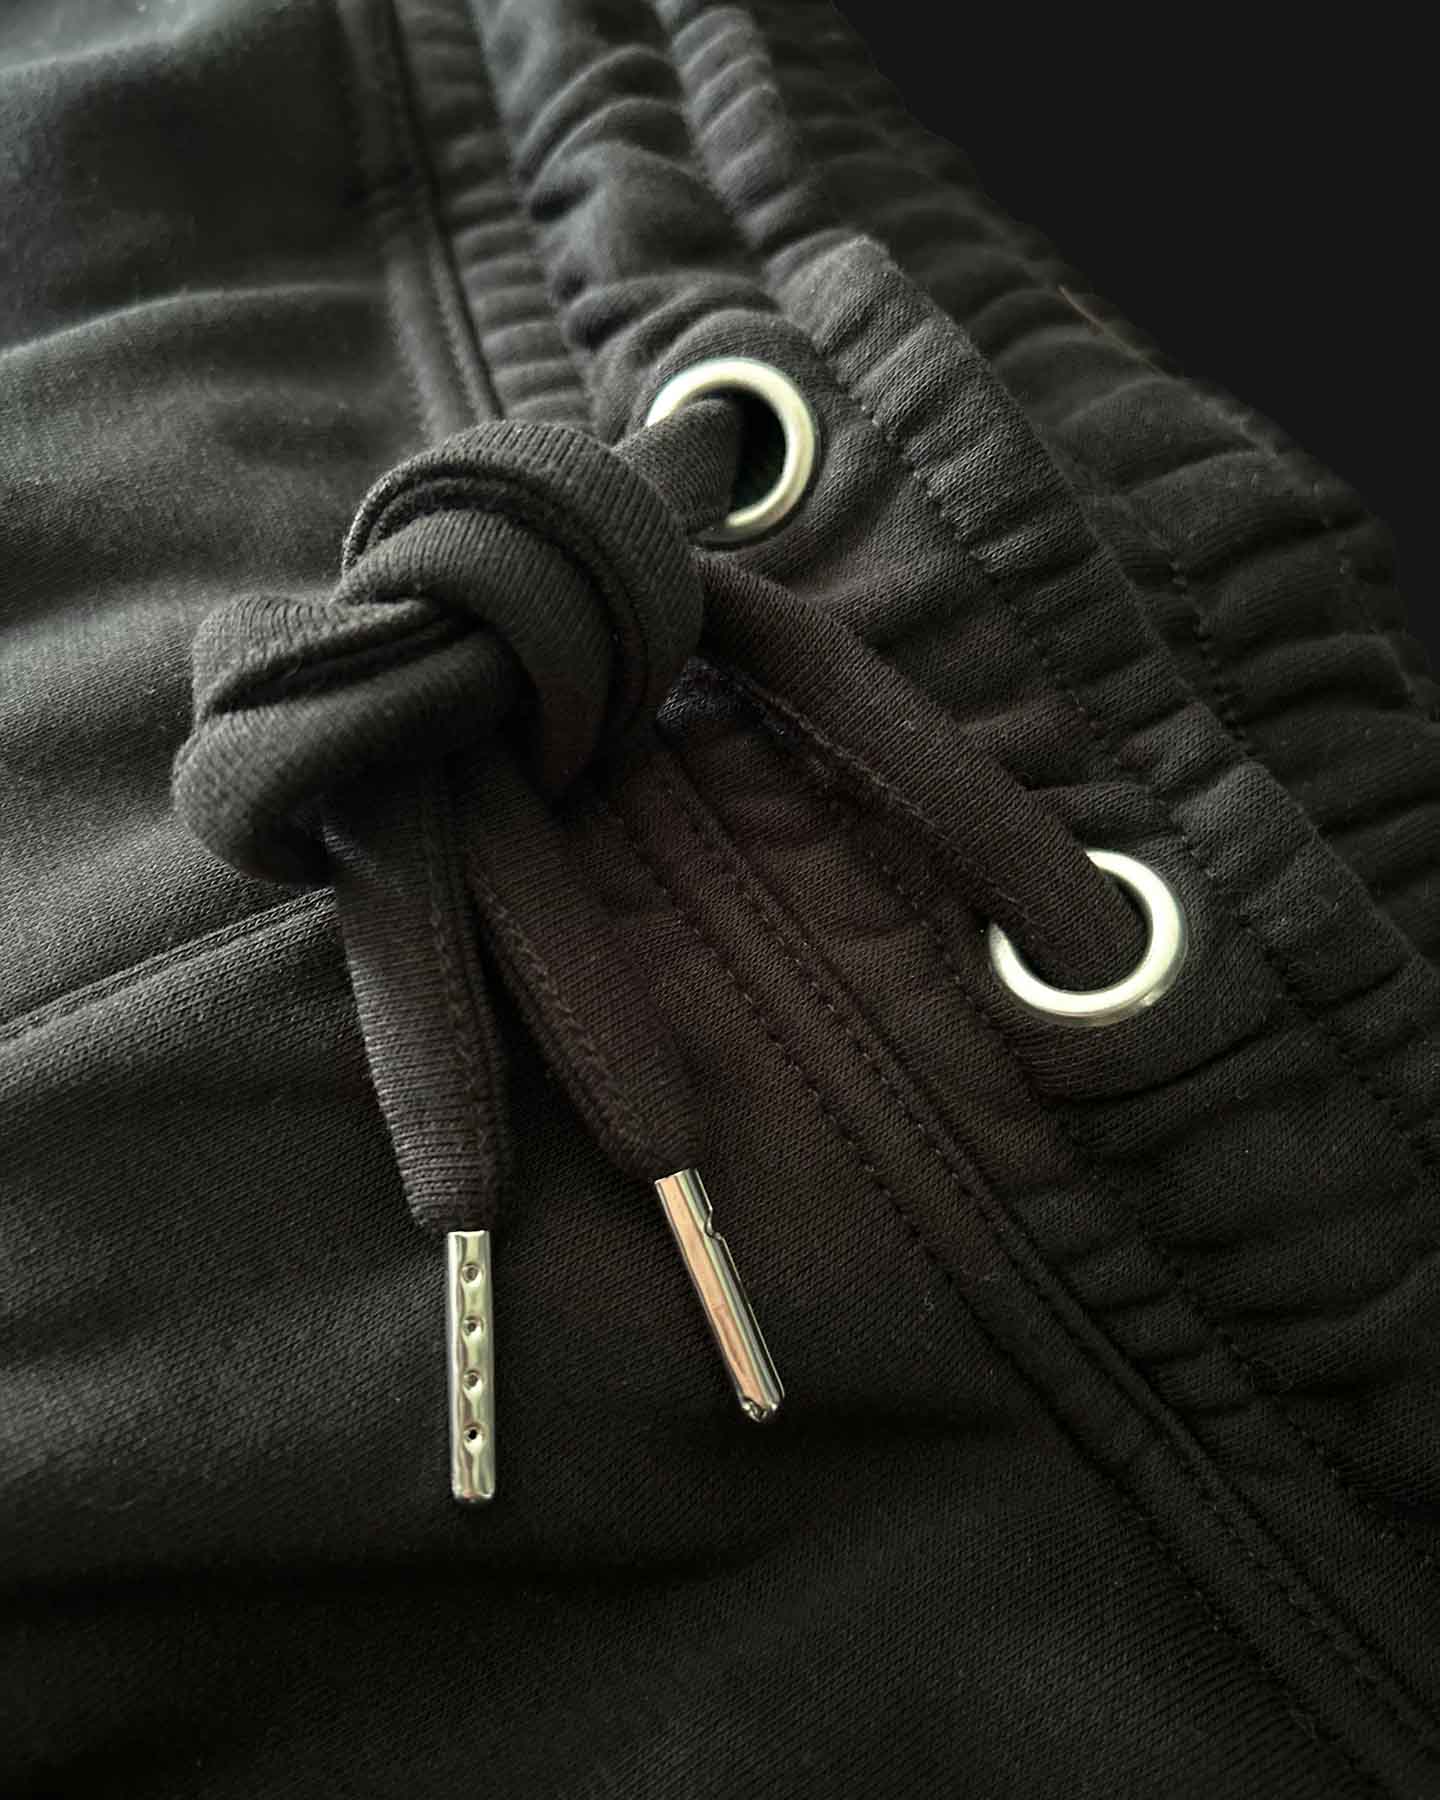 Detailed close-up of drawstrings on black Essentials Men's Casual Jogger Shorts, highlighting quality and design